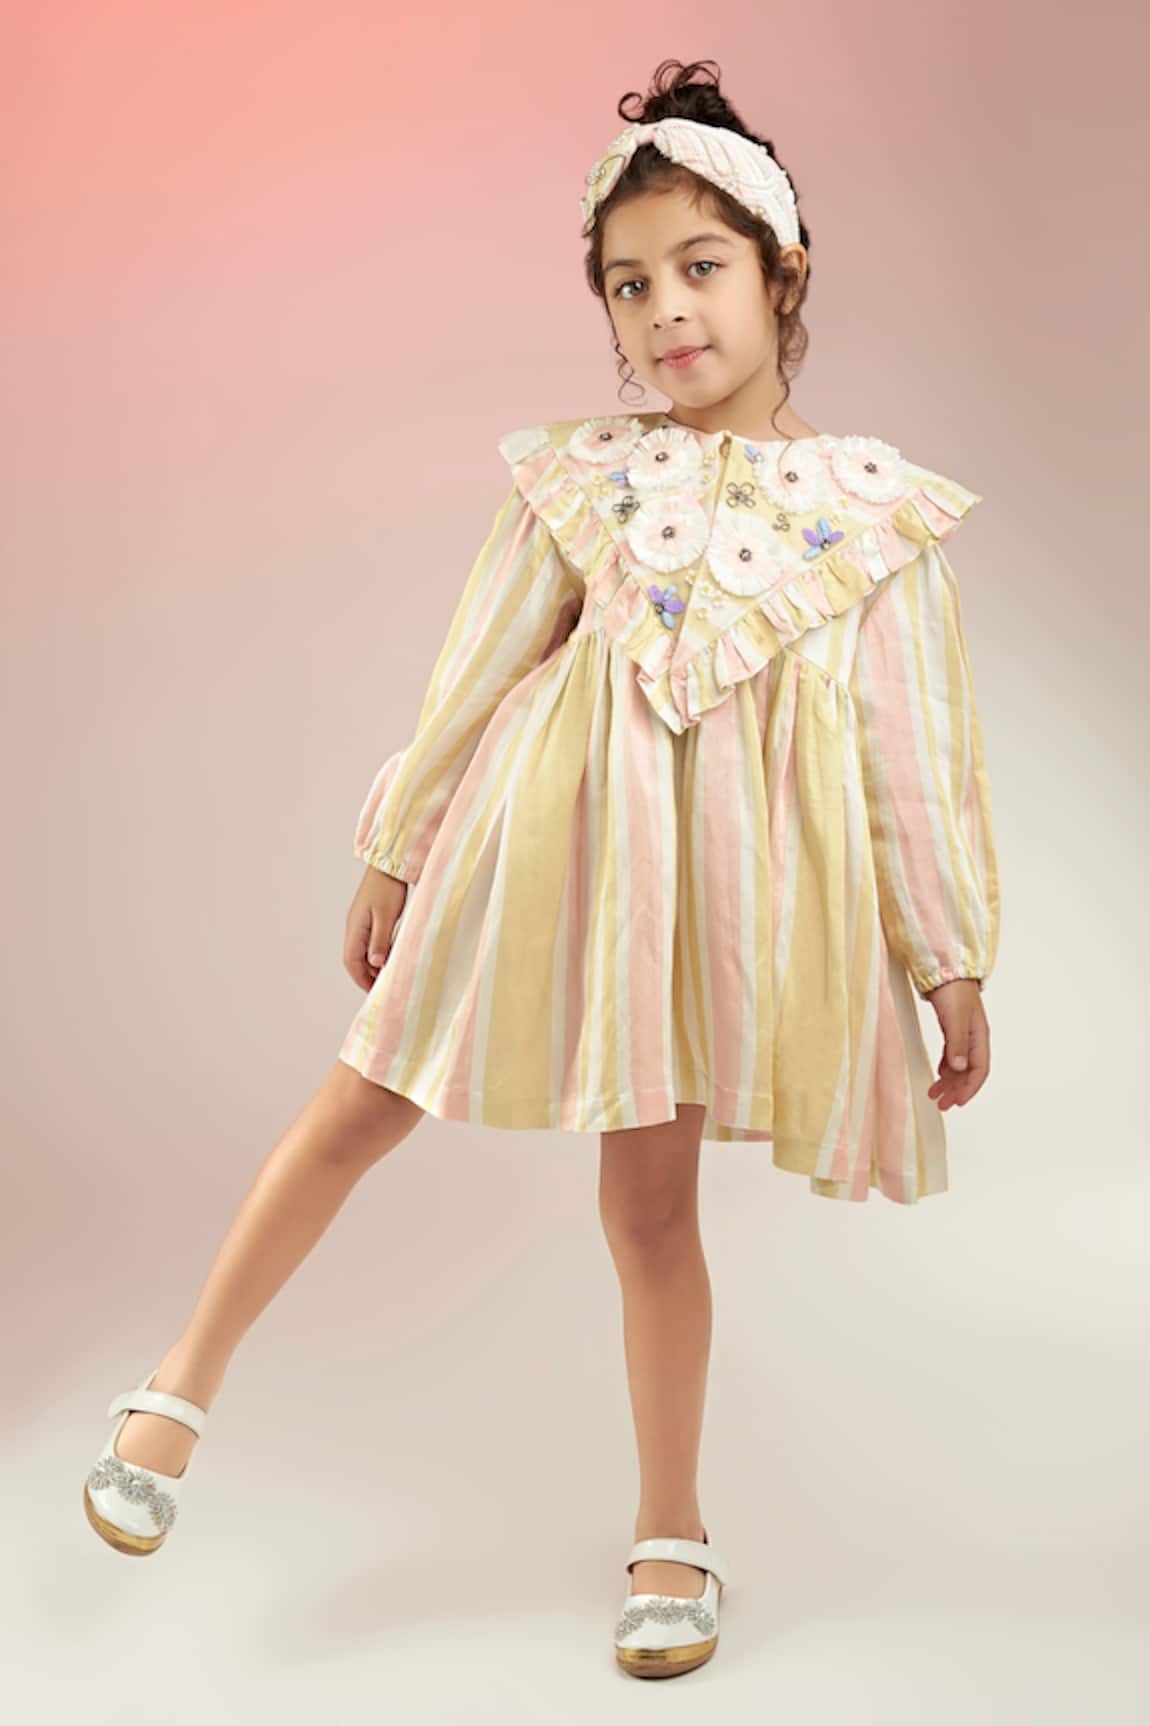 Joey & Pooh Placement Posies Embellished Dress